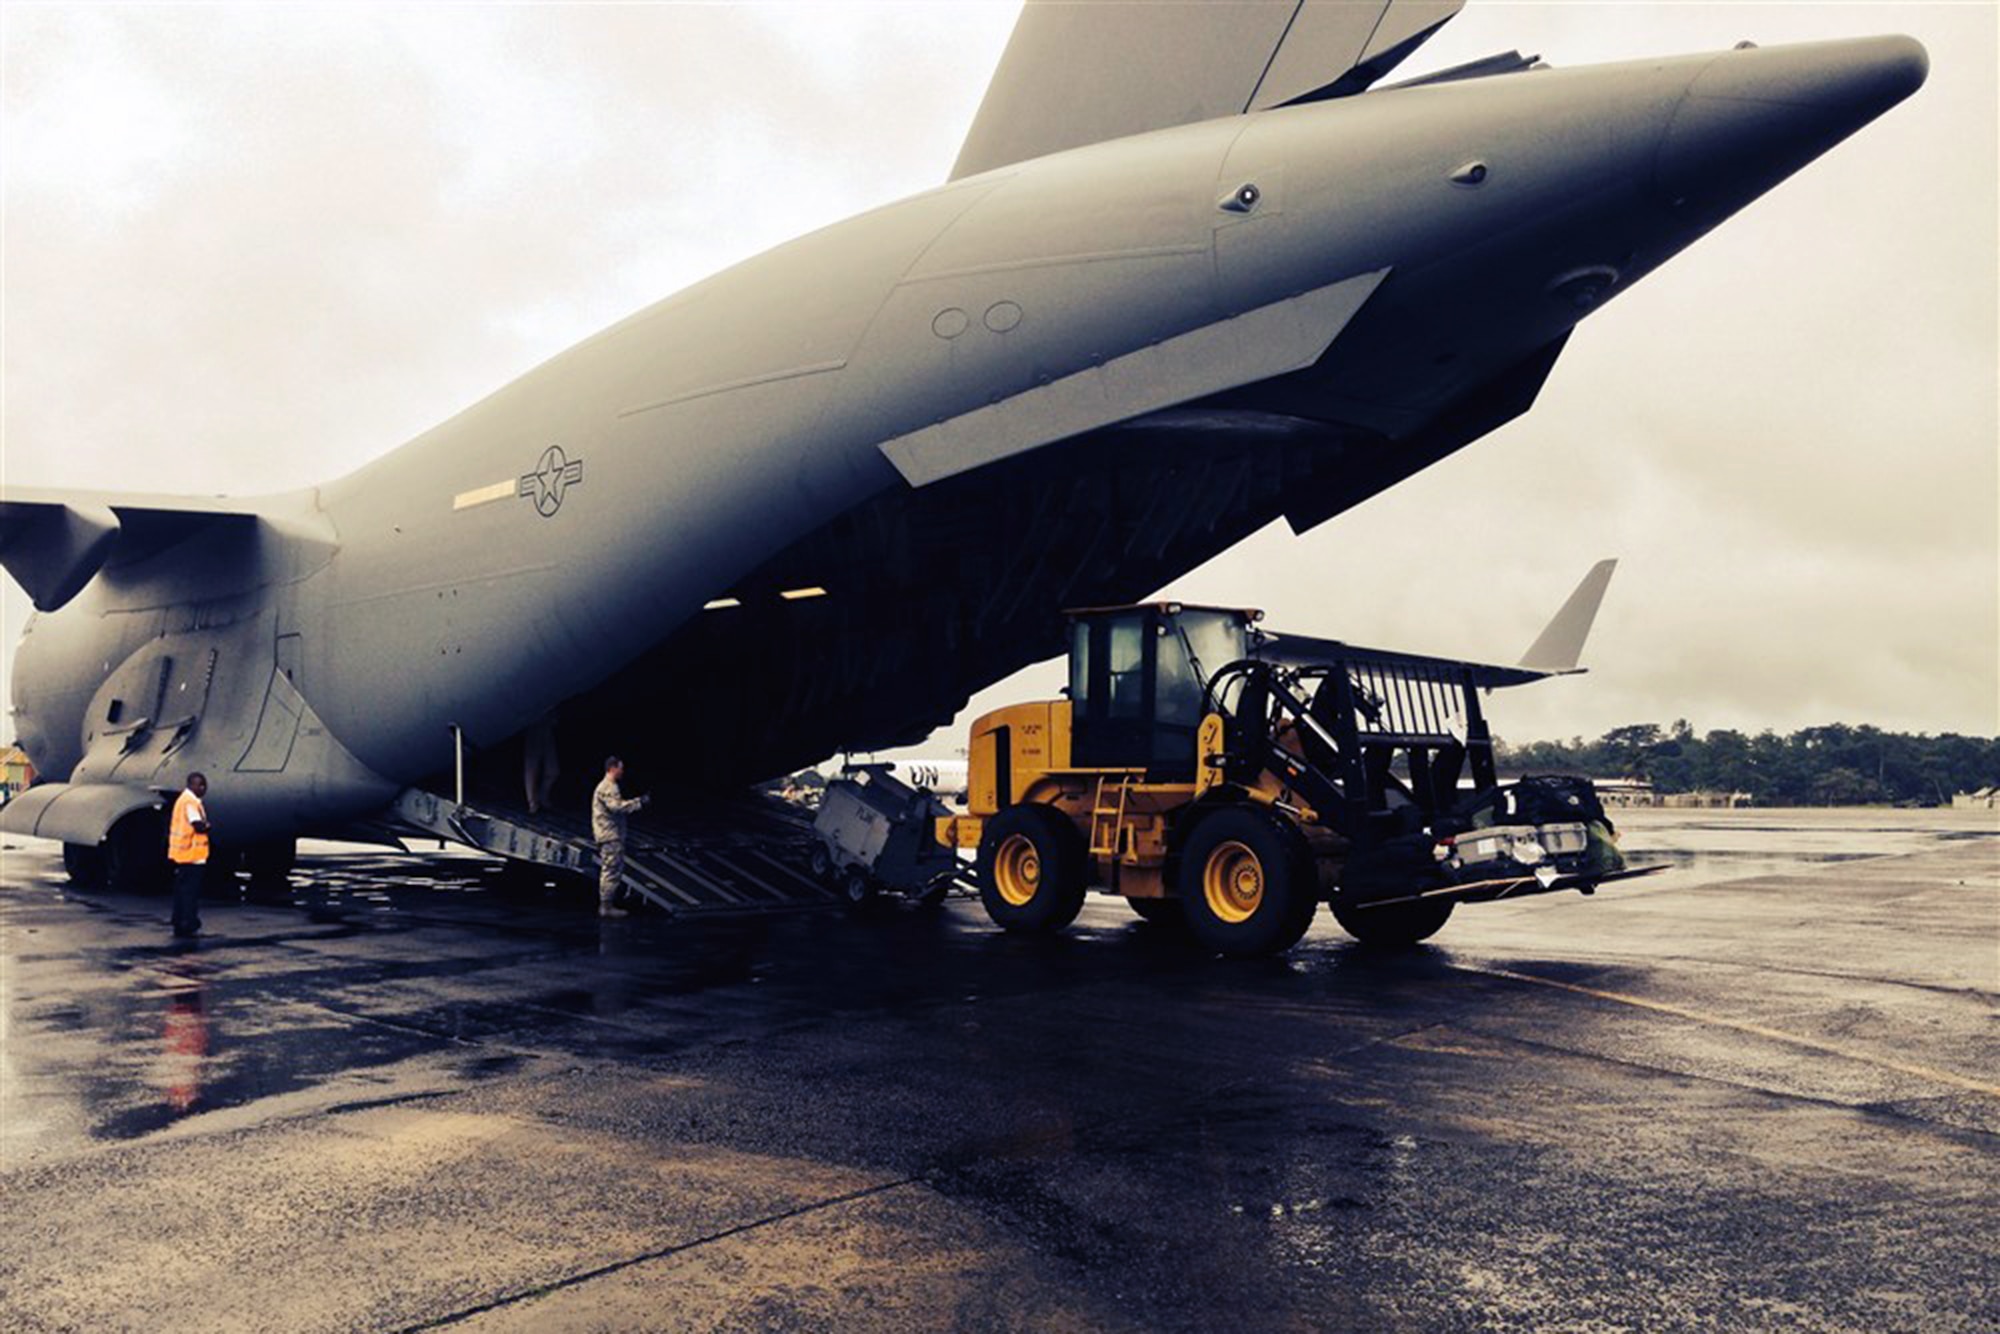 A Joint Base Lewis-McChord C-17 Globemaster III aircraft arrived in Liberia Oct. 8, with the first shipment of increased military equipment and personnel for the anti-Ebola fight, Operation Unified Assistance. The cargo included a heavy duty forklift, a drill set and generator and a team of seven military personnel, including engineers and airfield specialists. (photo courtesy/U.S. Embassy, Monrovia, Liberia)